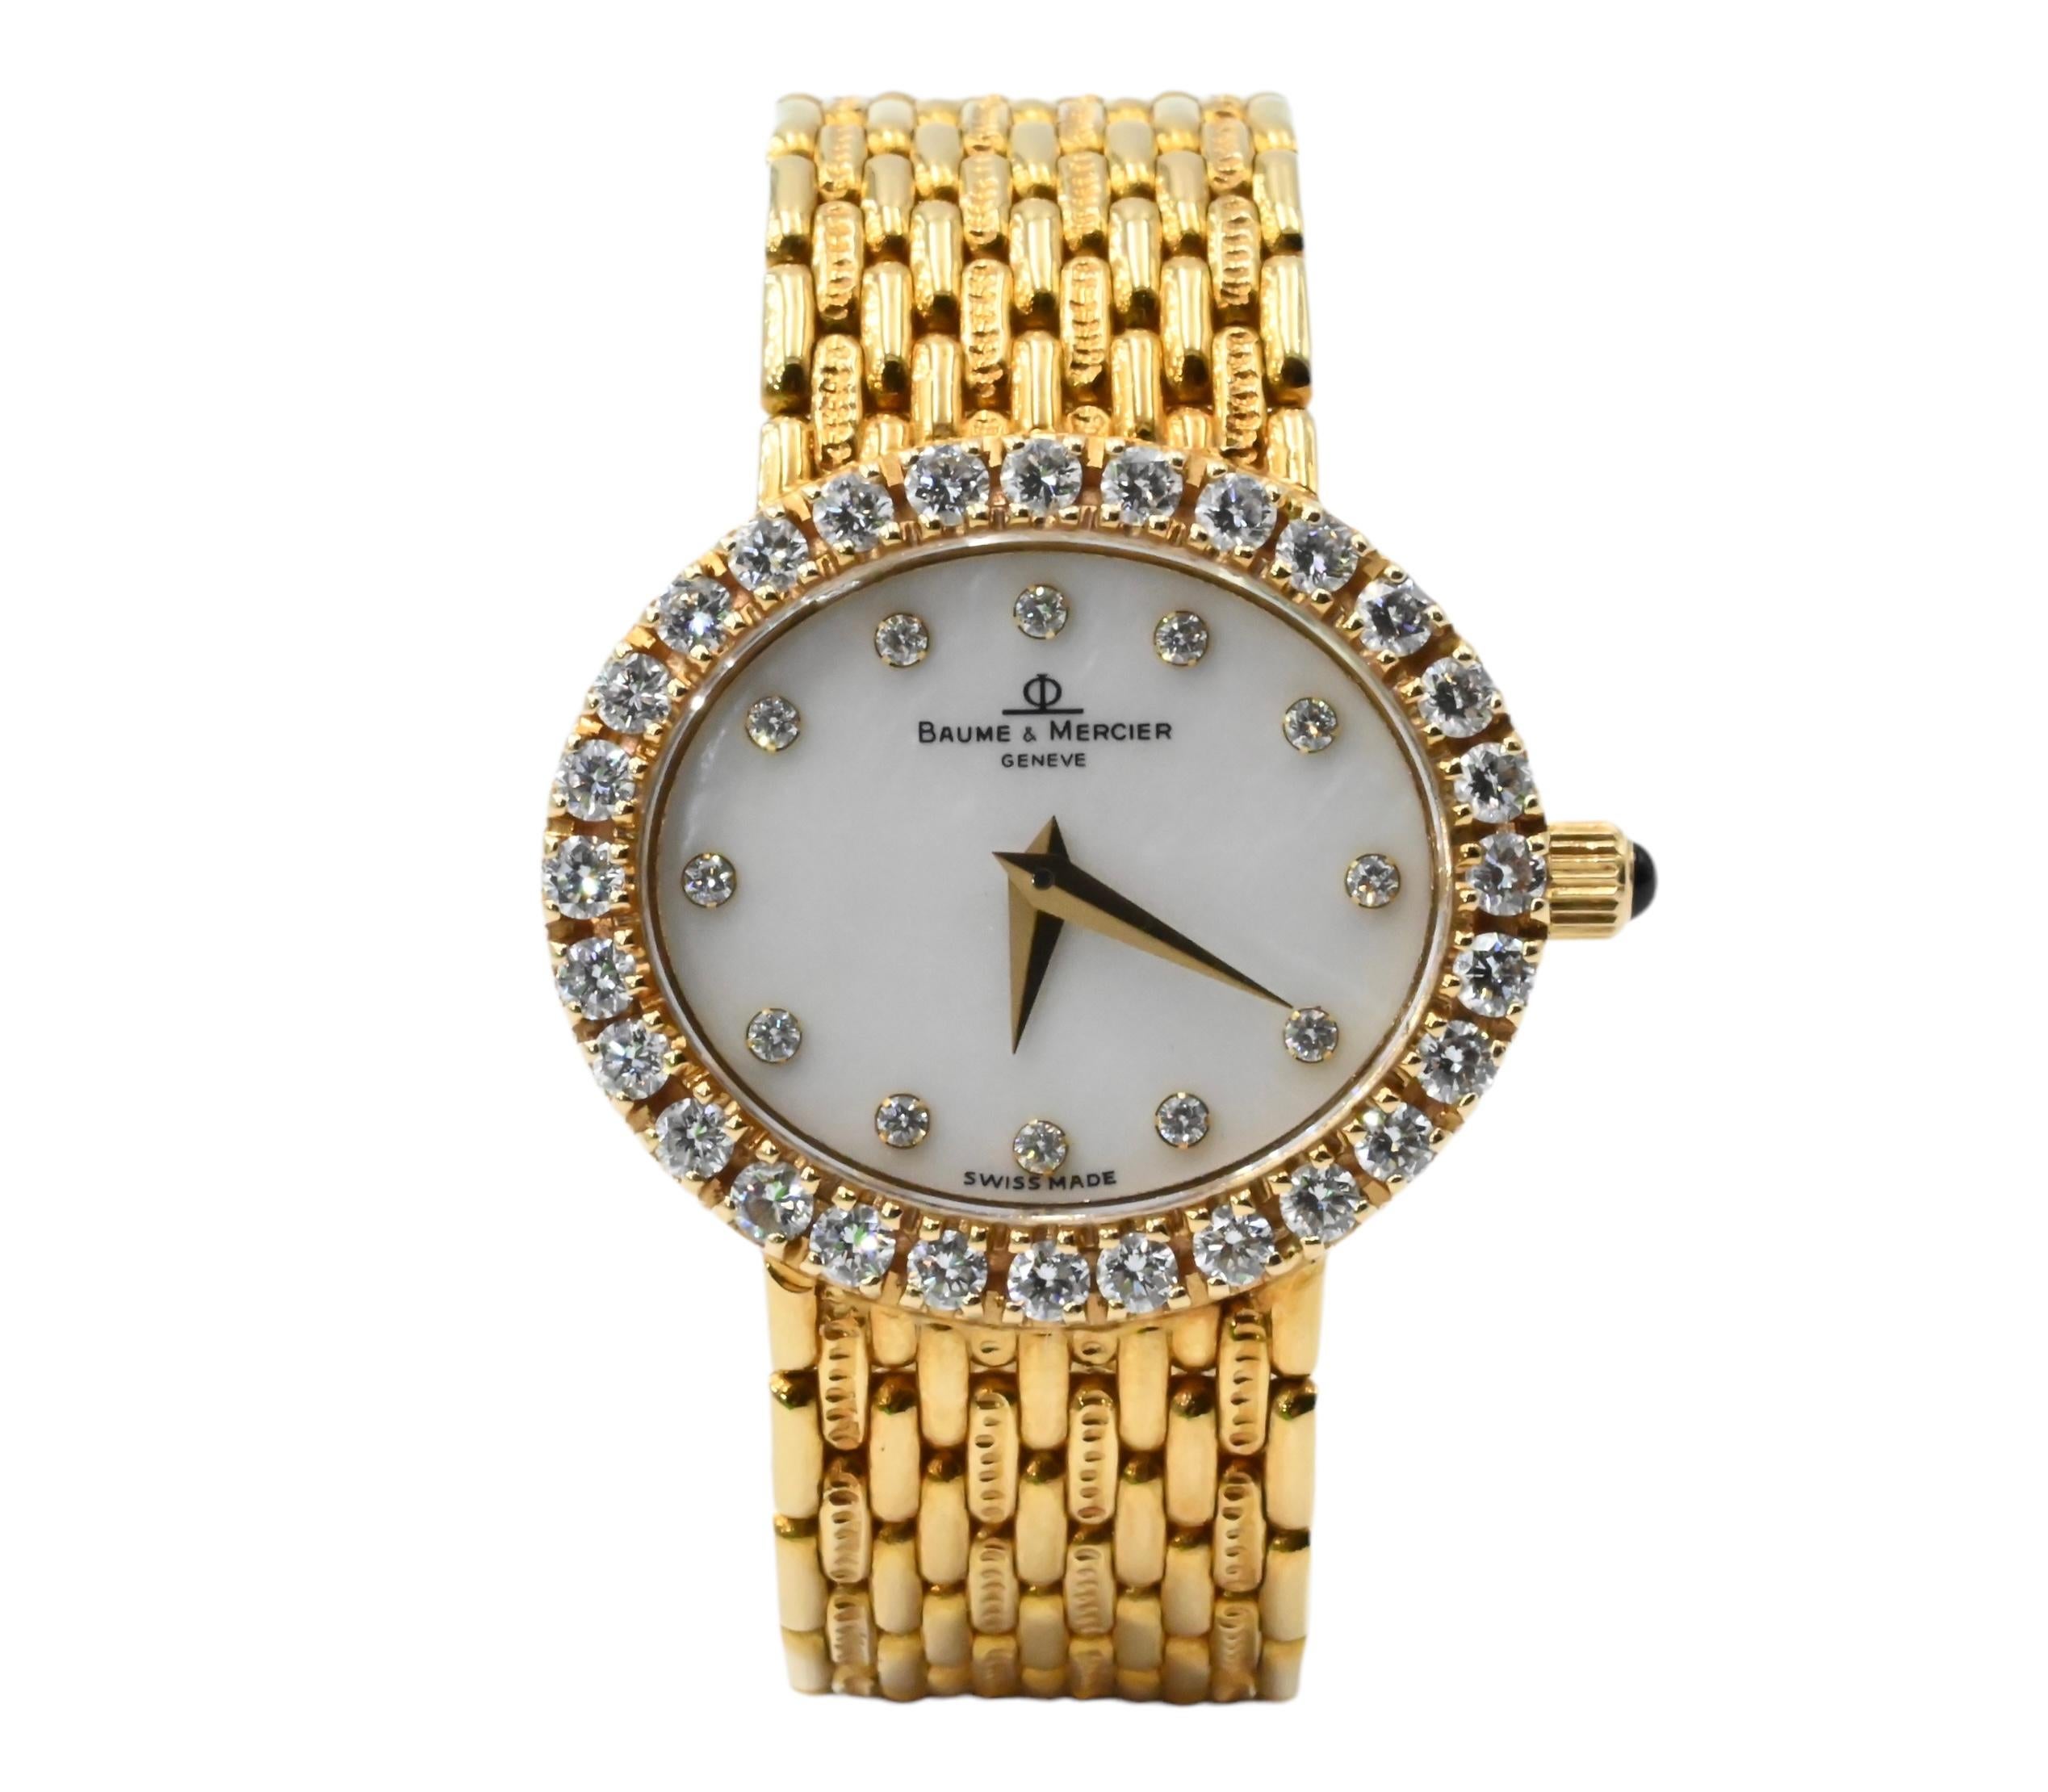 Baume & Mericer 18K Yellow Gold Diamond Watch Model 18310 9

Features:
•MODEL NO: 18210 9
•MOVEMENT: JEWELED QUARTZ MOVEMENT 
•CASE MATERIAL: SOLID 18K YELLOW GOLD
•CONDITION: LIKE NEW EXCELLENT PRE-OWNED
•CASE MEASUREMENTS: 24.5MM X 21.5 MM (NOT